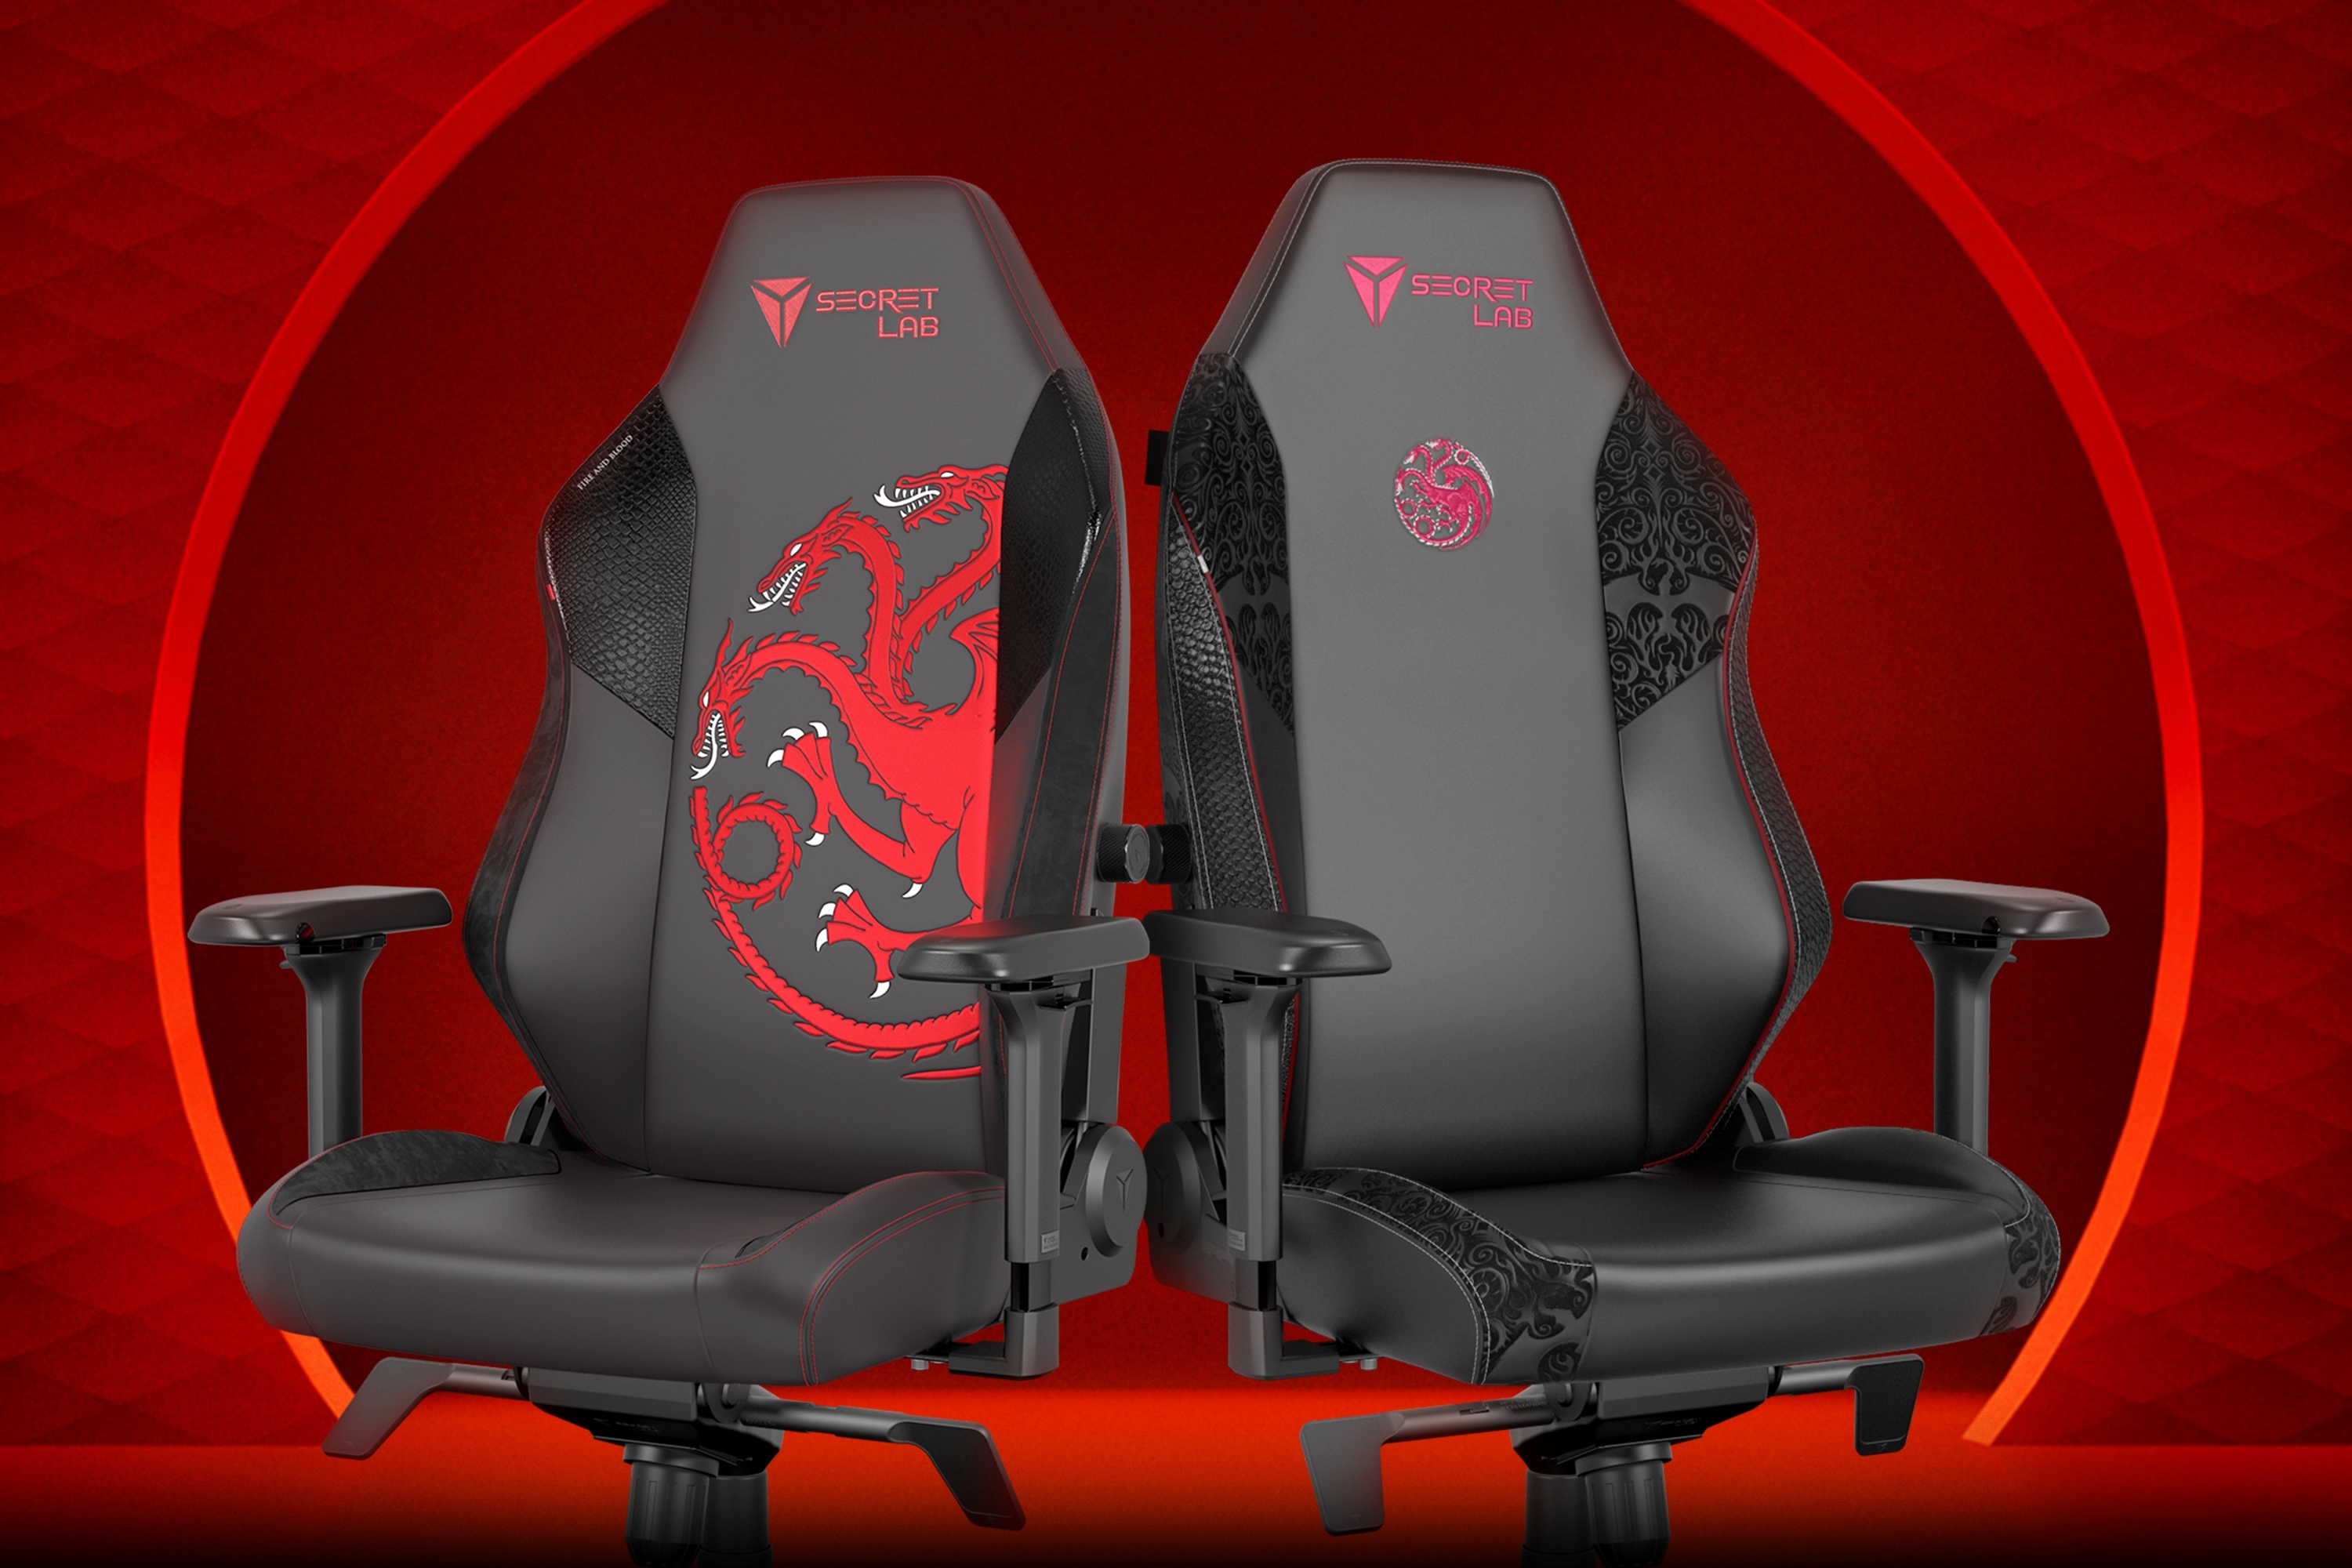 Secretlab, Year of the Dragon, Chinese New Year, Lunar New Year, dragon year, dragon years, Game of Thrones, House of the Dragon